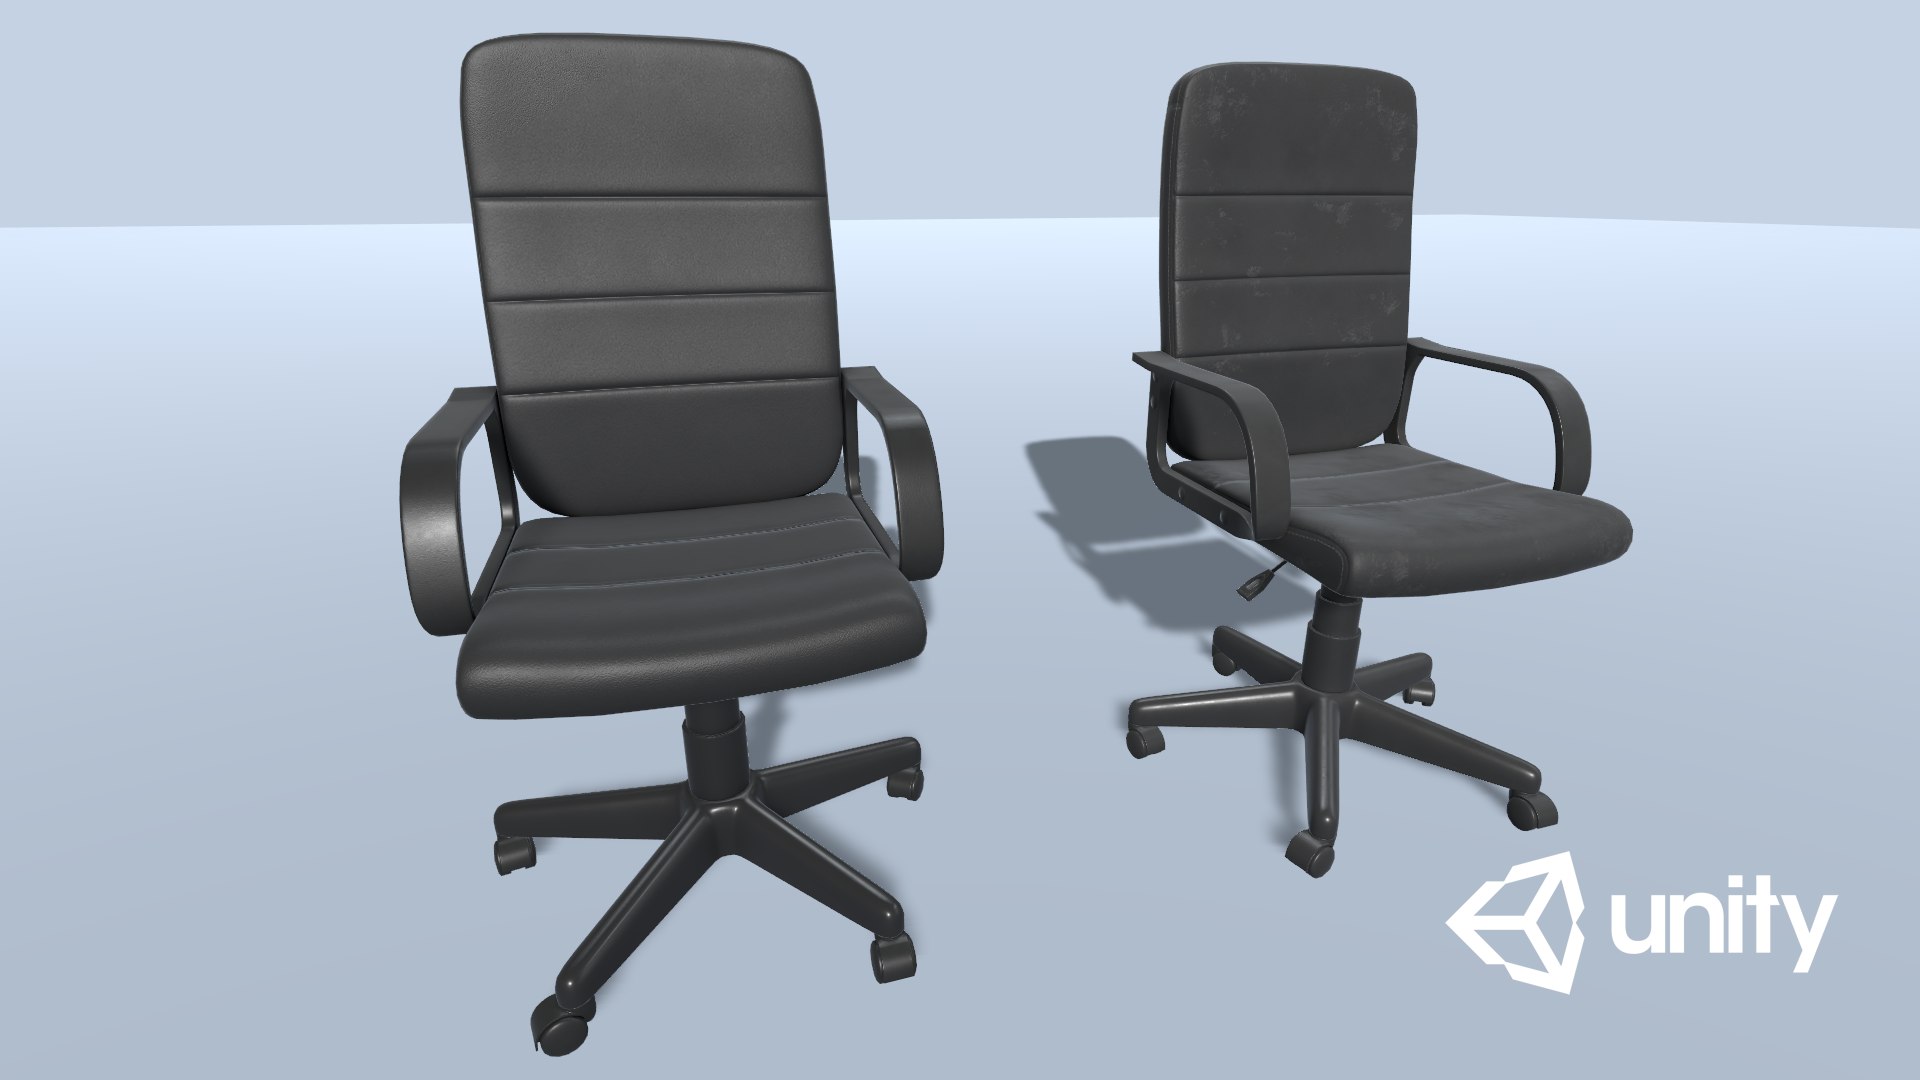 3D model low-poly office chair - TurboSquid 1645471